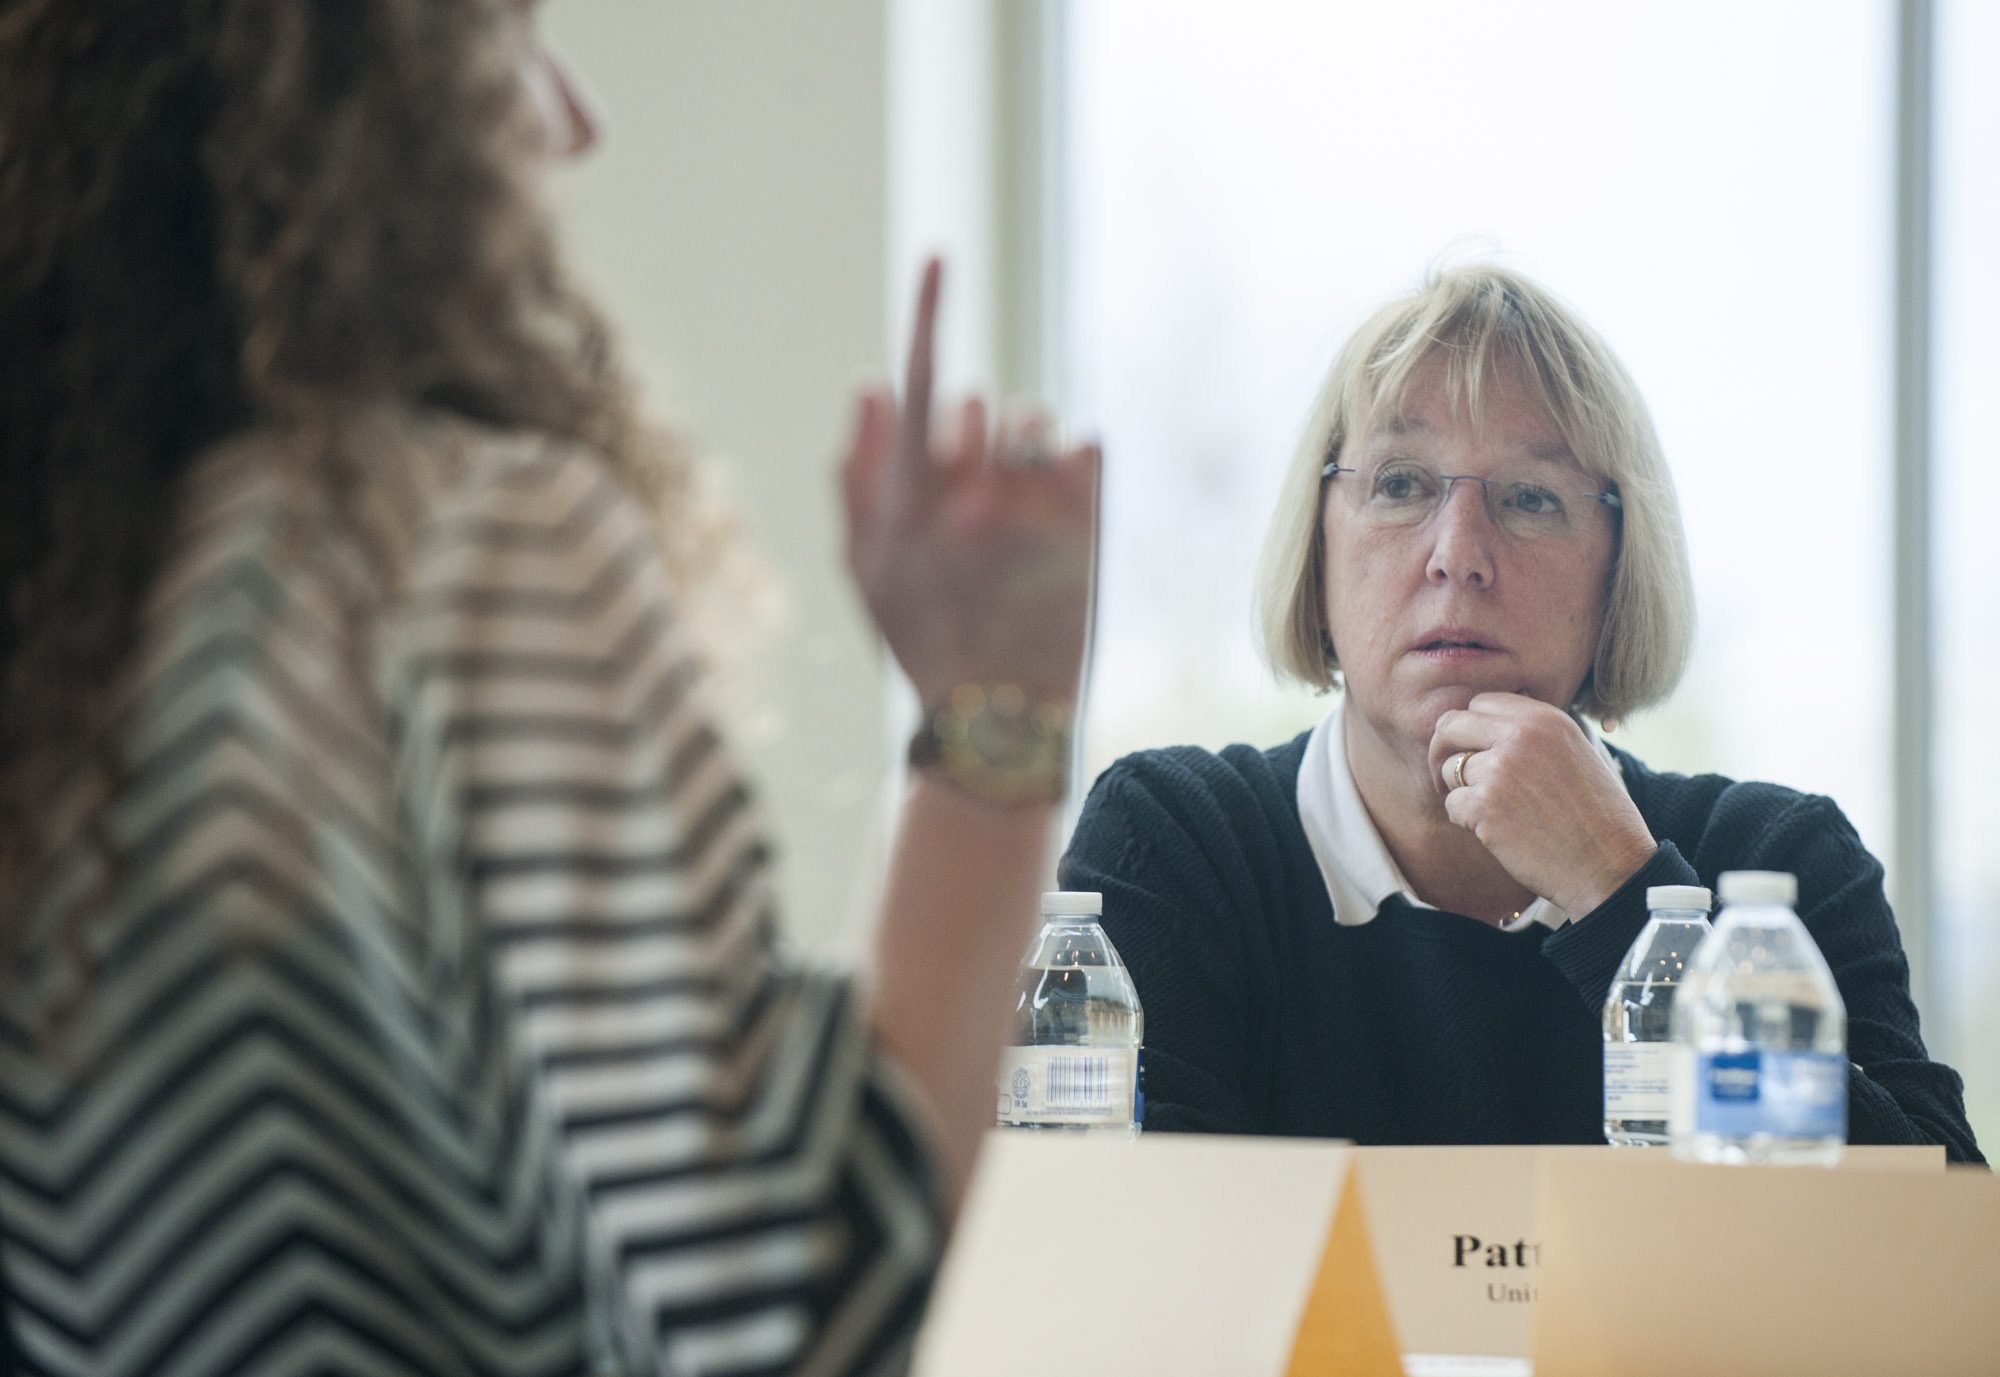 U.S. Sen. Patty Murray, D-Wash., spoke with Clark College students about college affordability on Wednesday, including Clark College student body President Sarah Swift, pictured.